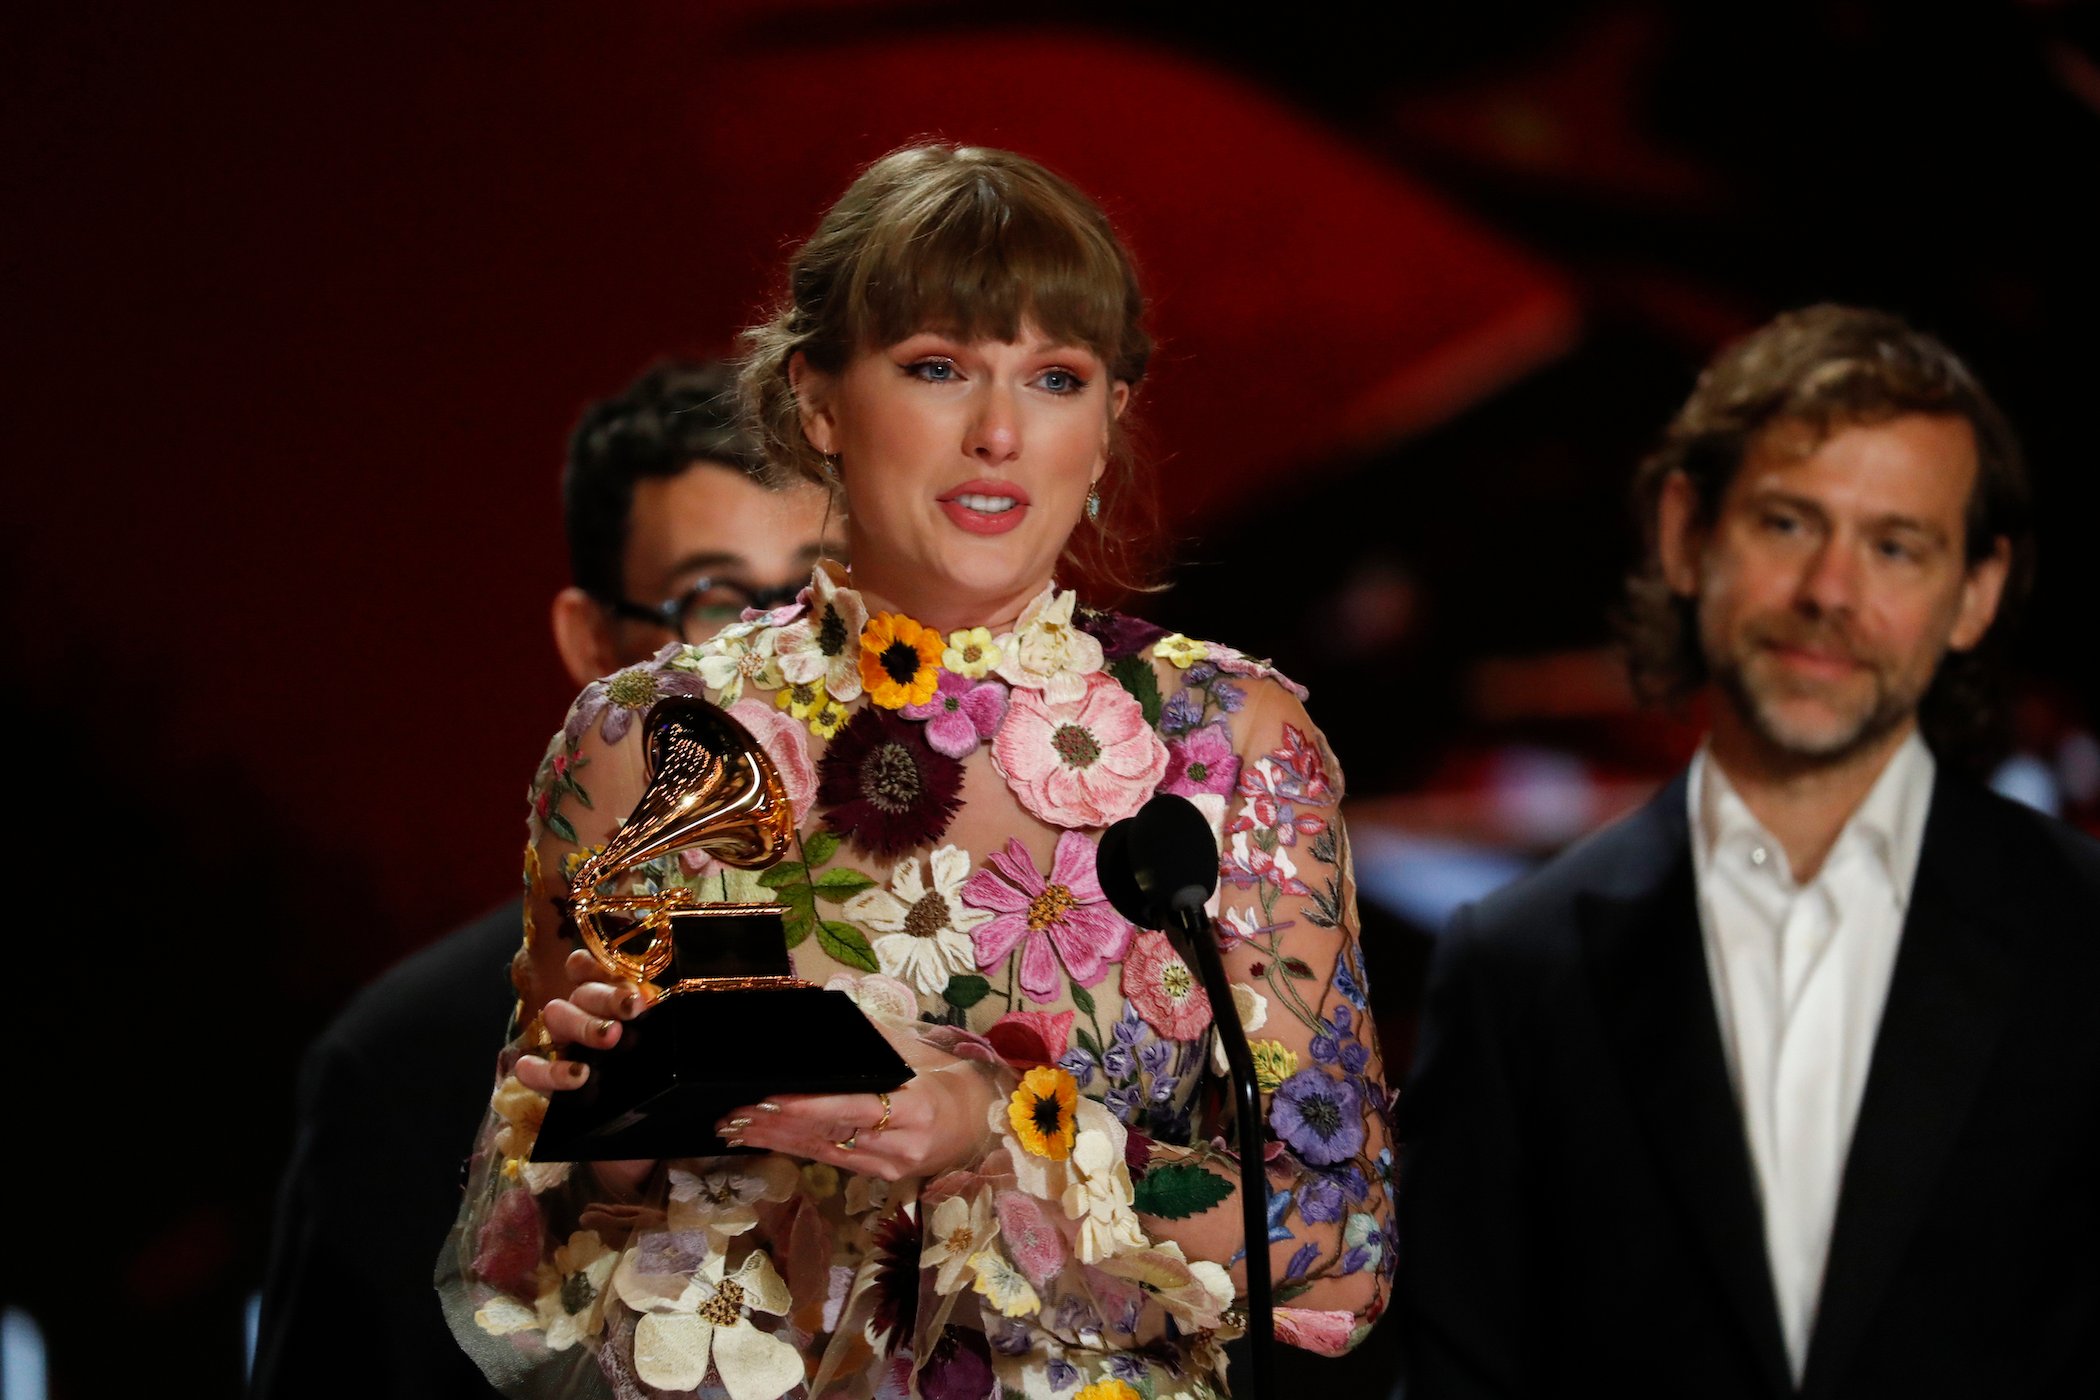 Taylor Swift wins the award for Album of the Year at The 63rd Annual Grammy Awards, broadcast live from the STAPLES Center